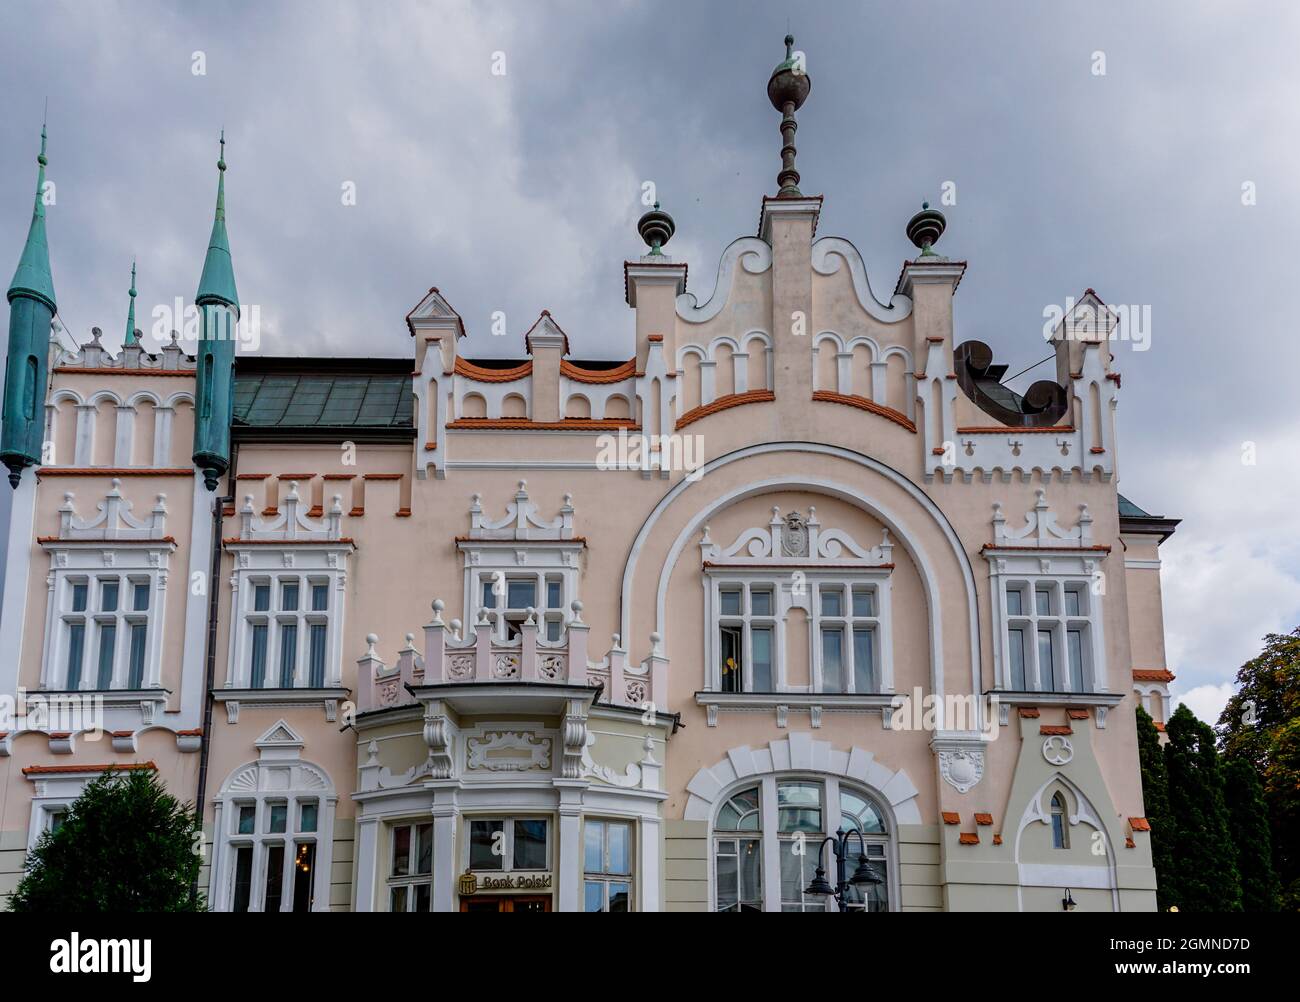 Rzeszow, Poland - 14 September, 2021: close up view of the architectural Renassaince style of the Polish Bank building in the old town of Rzeszow Stock Photo